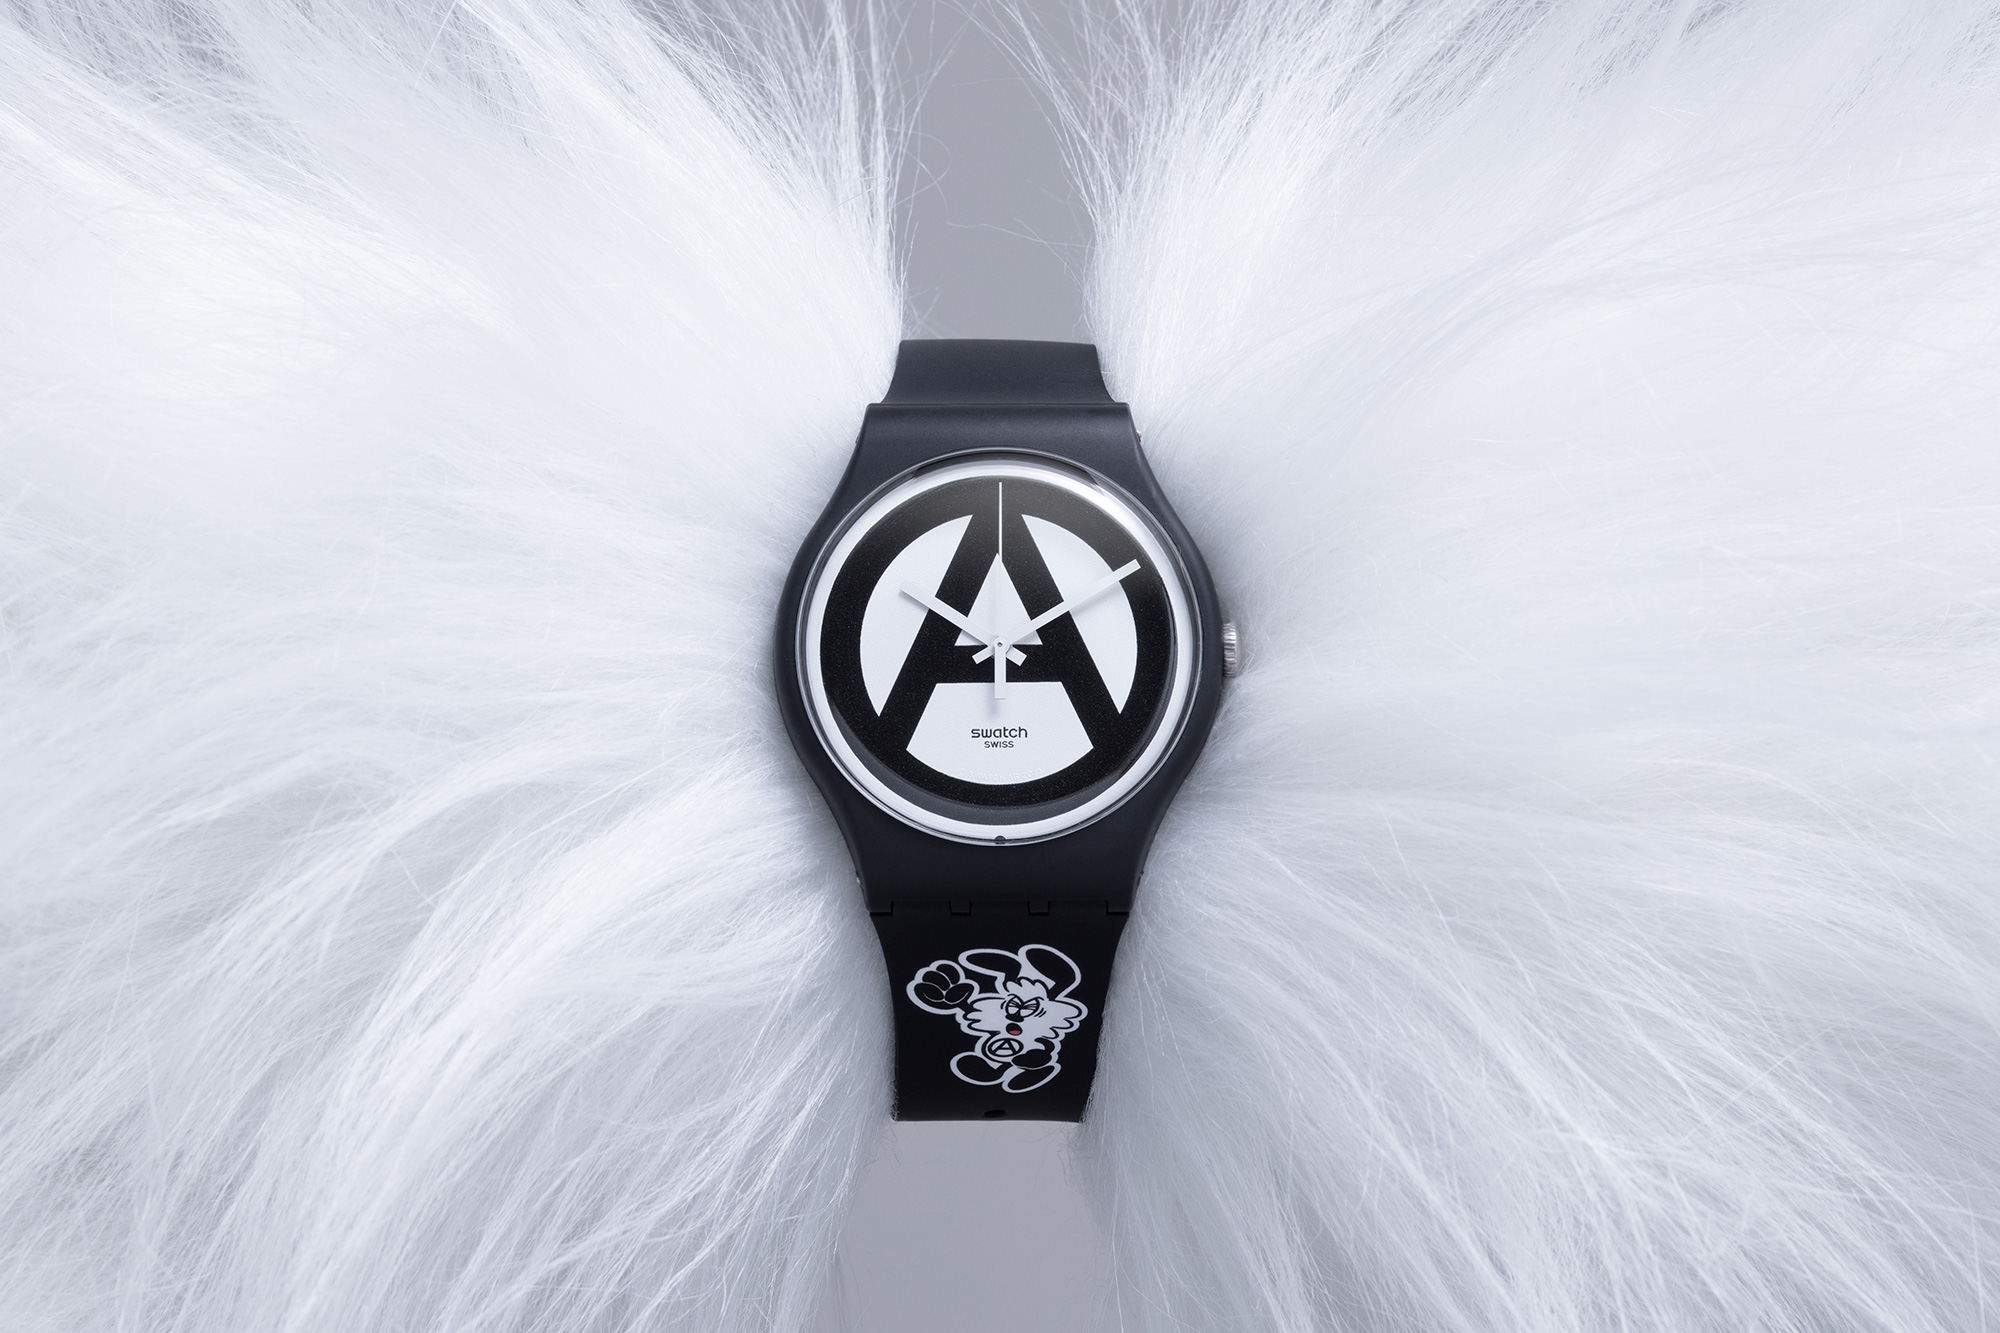 Product shot of black and white watch wrapped around white fluff